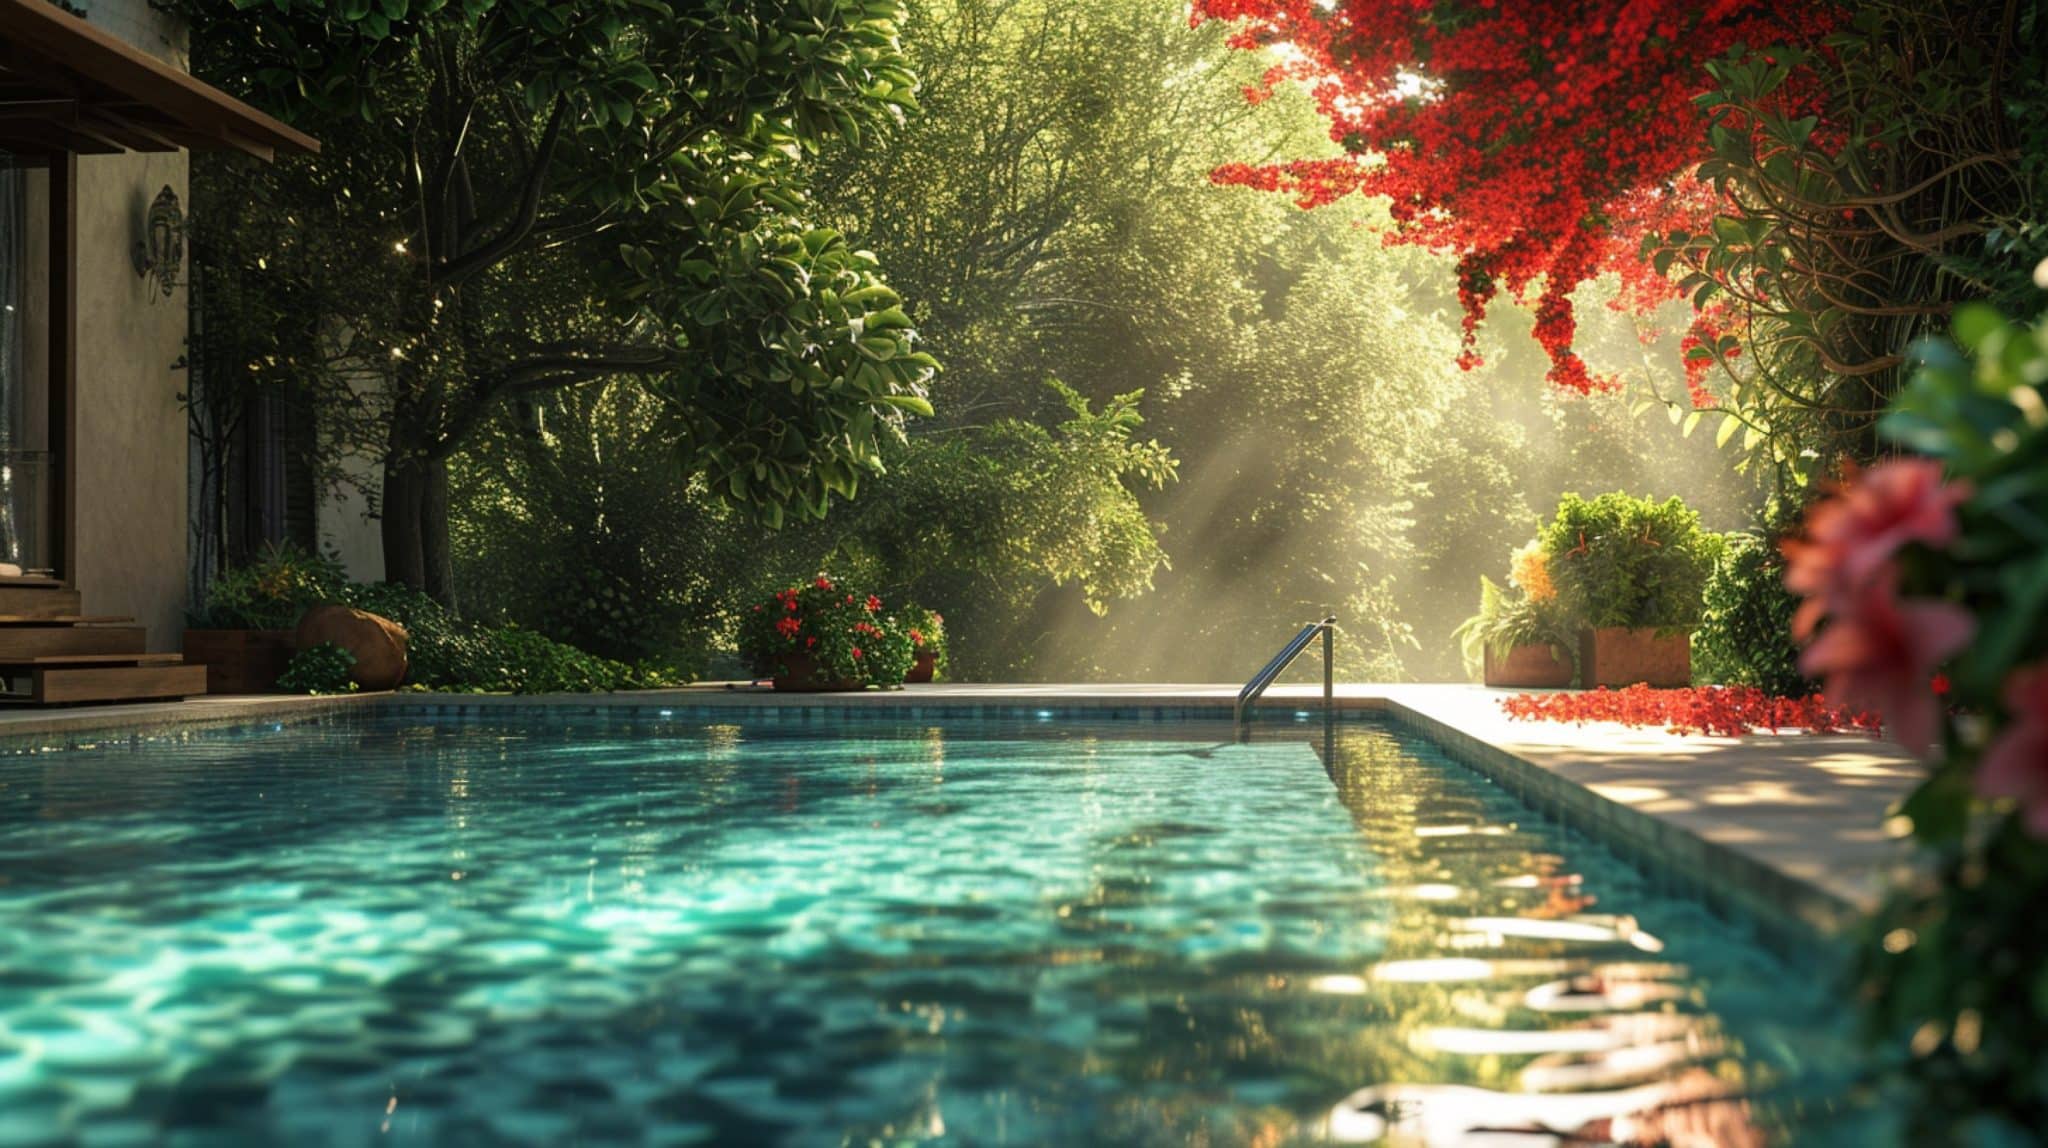 The Best Plants and Trees for Around the Pool in Ontario